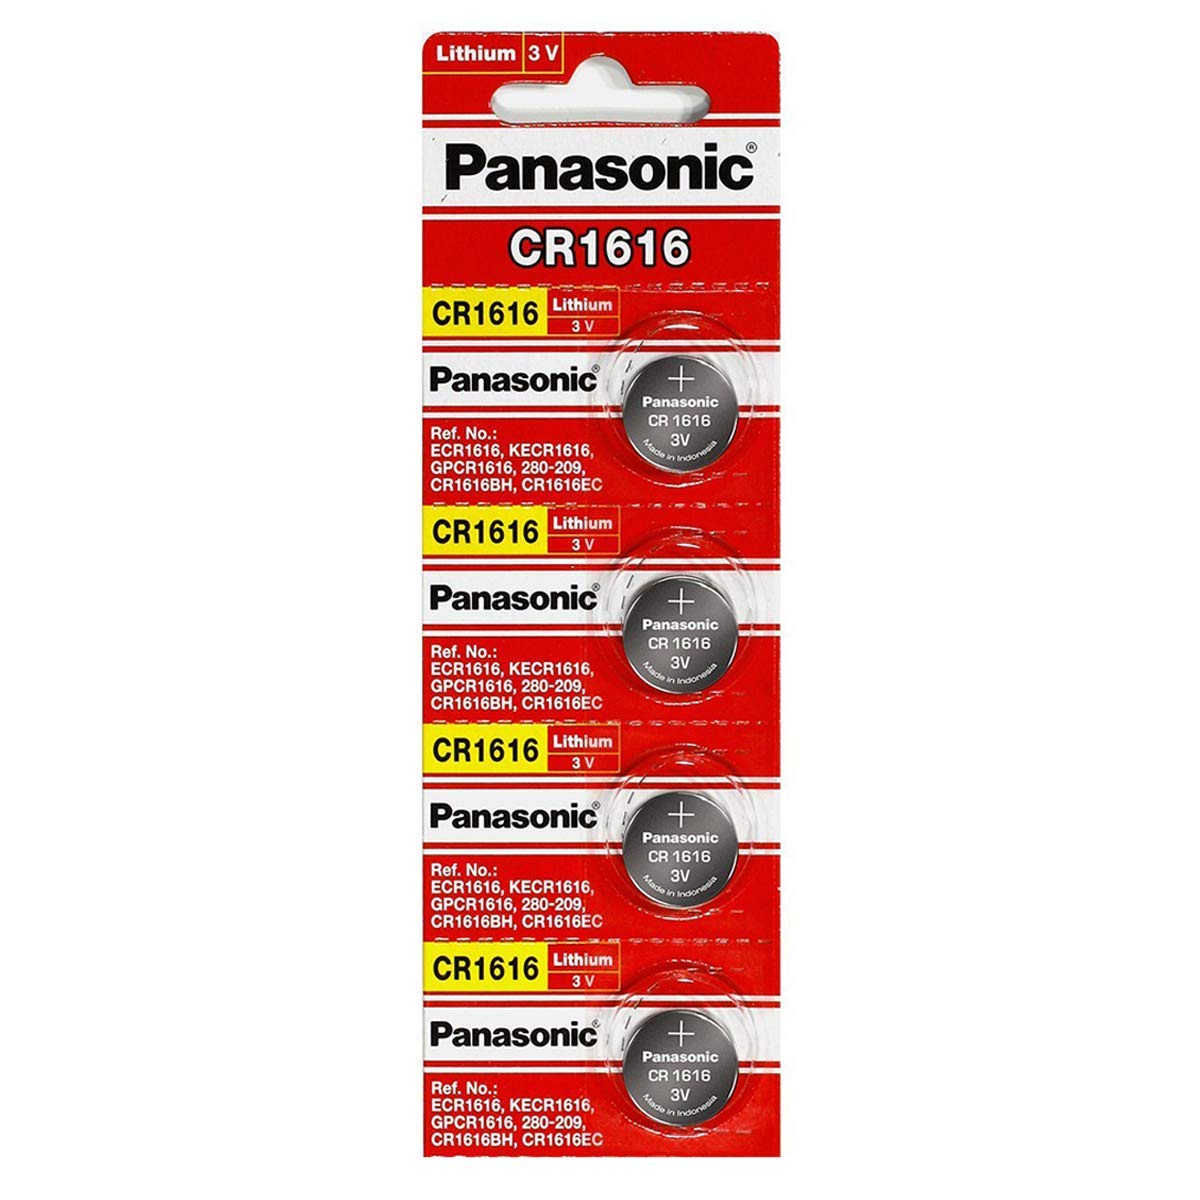 Panasonic CR1616 3V Coin Cell Lithium Battery, Retail Pack of 4